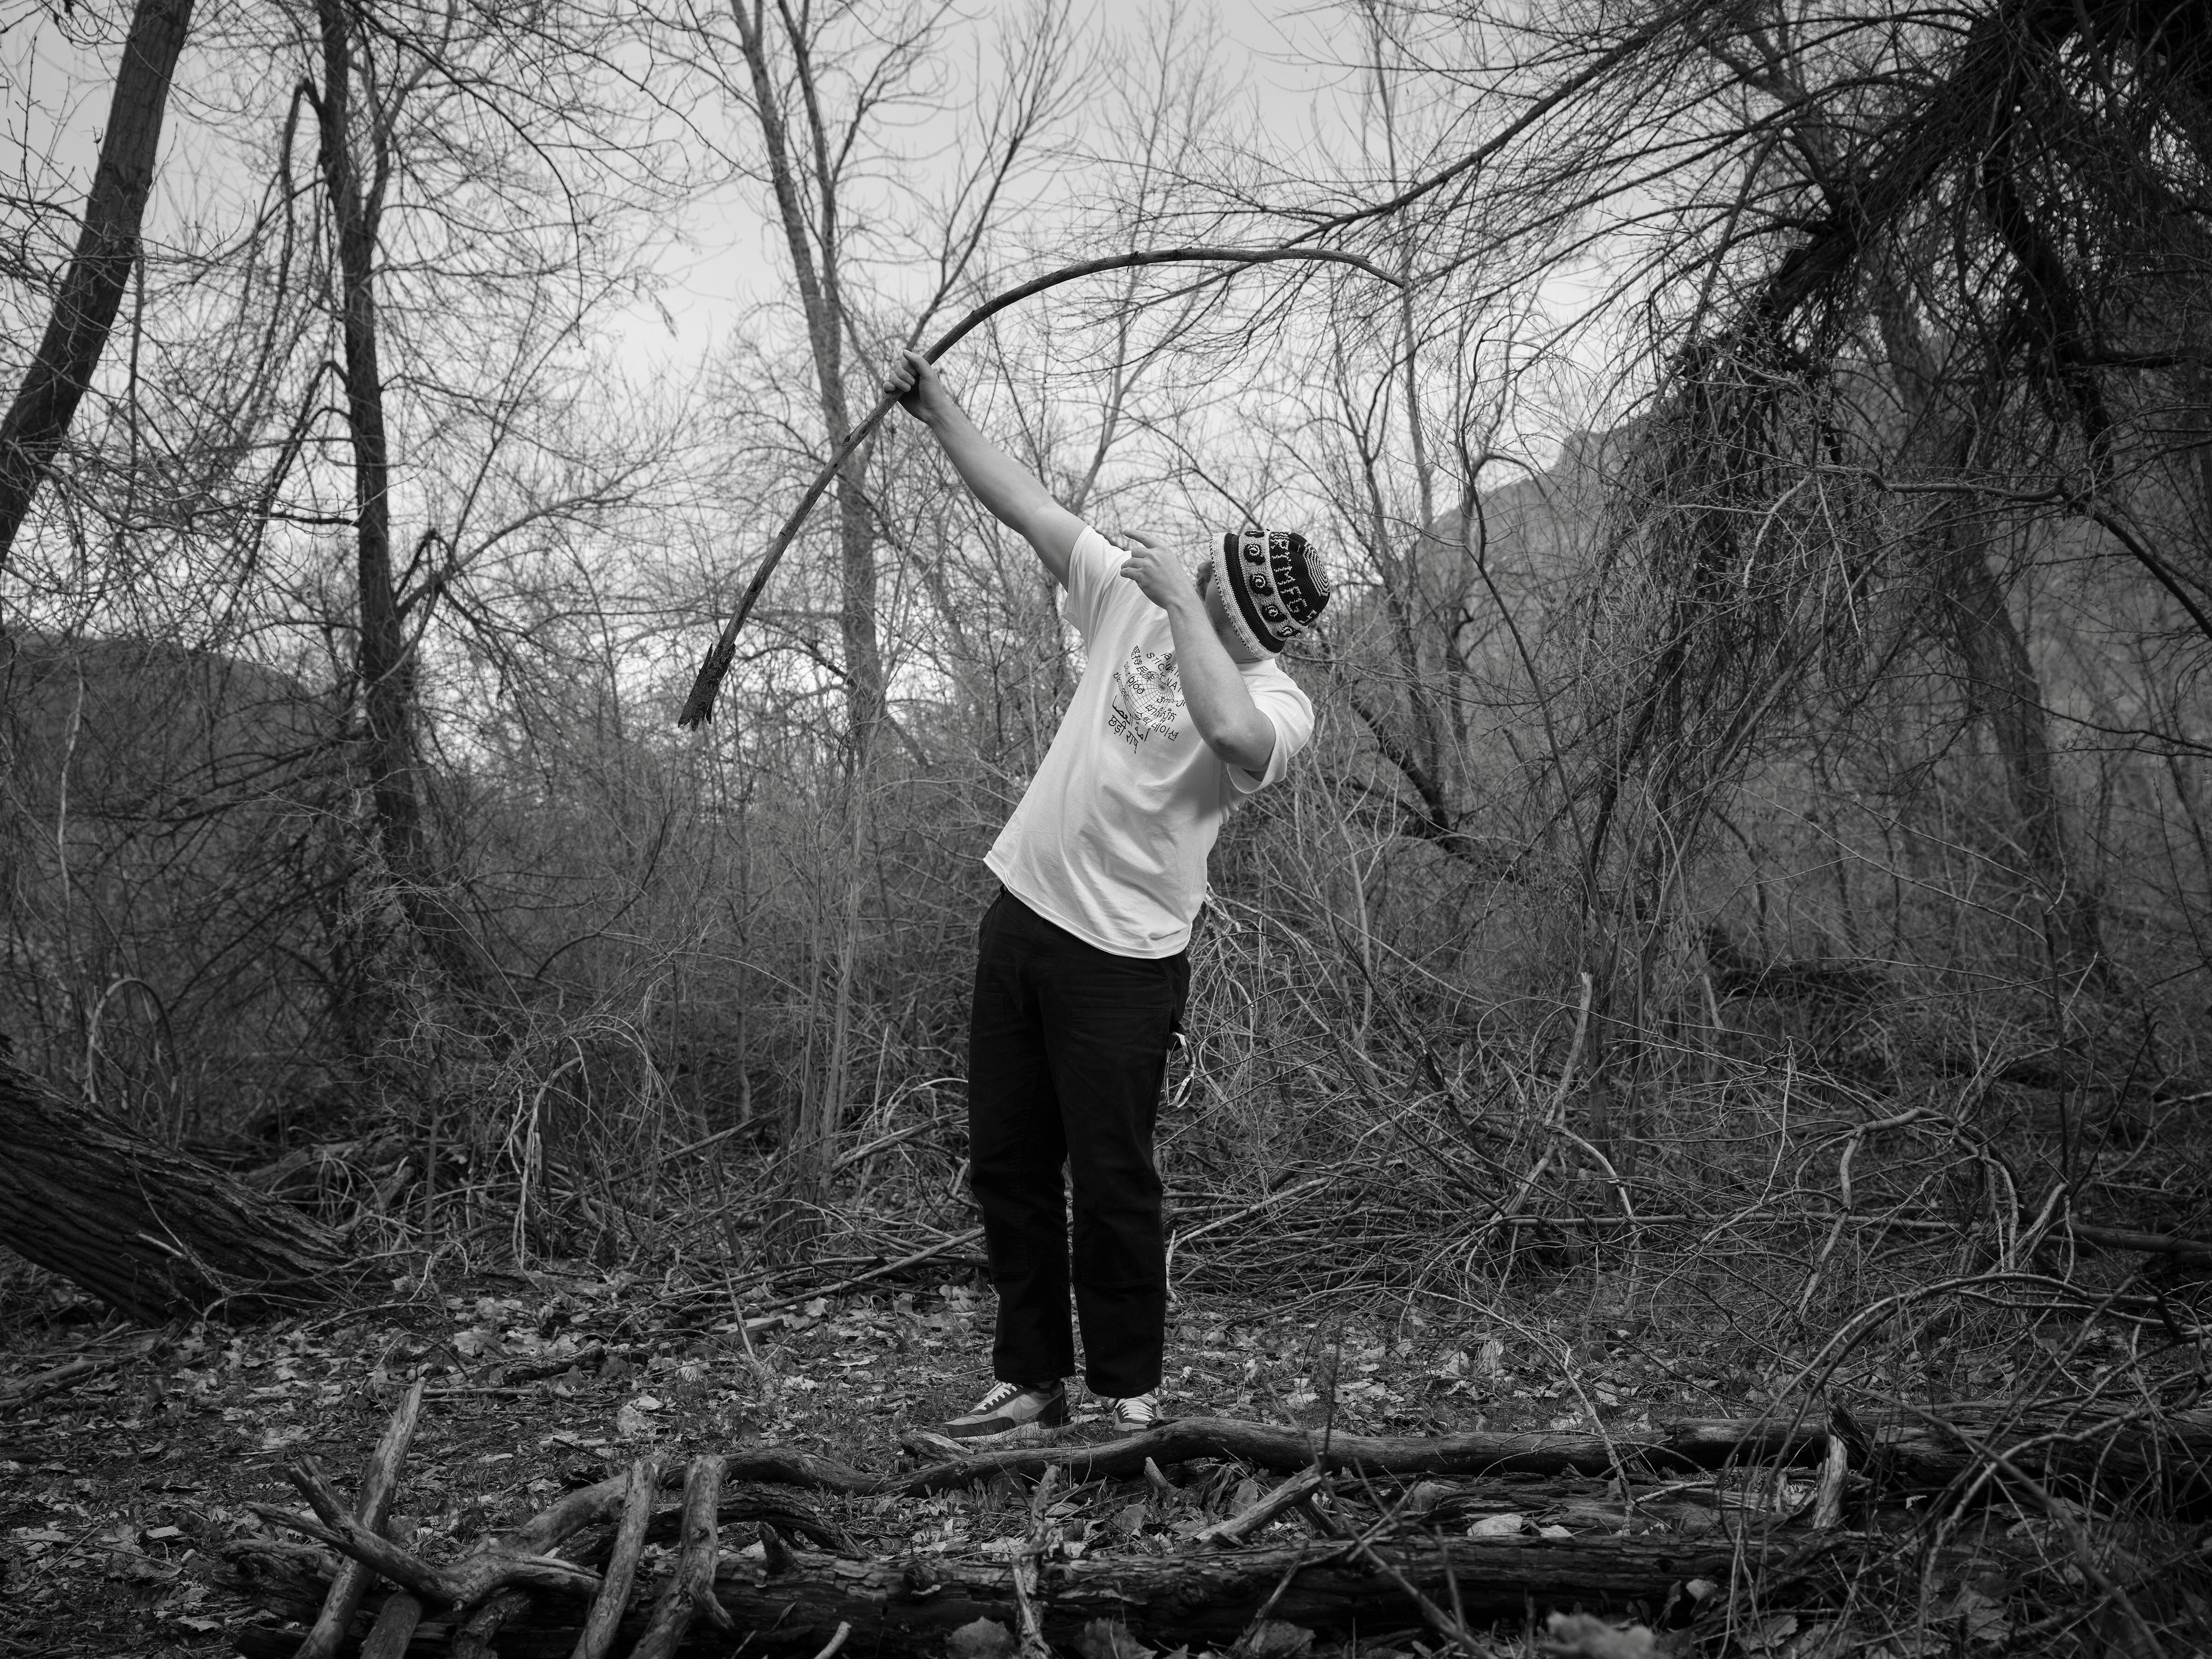 (Lindsay D'Addato | The New York Times) Logan Jugler, who with a friend found minor fame on Instagram by reviewing sticks, judges a stick for its bow-like properties in Ogden, Utah on March 30, 2024. What started as a wilderness jest has morphed into something slightly less tongue-in-cheek, for the act of finding, handling and appreciating a good stick seems to speak to one’s inner 5-year-old.